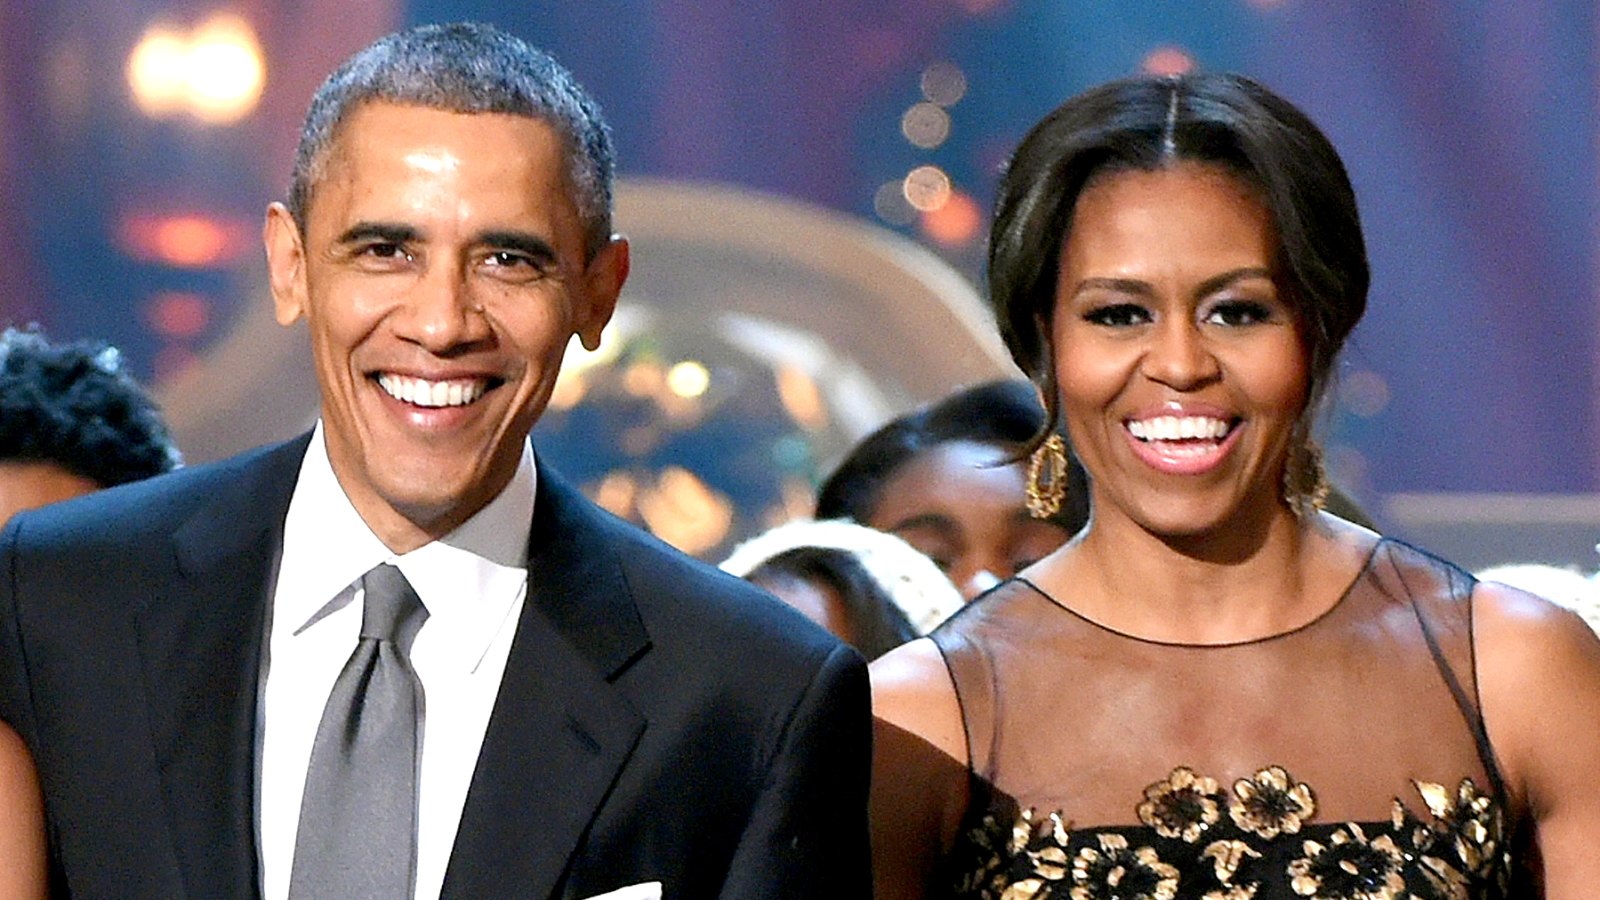 Barack Obama and Michelle Obama speak onstage at TNT Christmas in Washington 2014 at the National Building Museum on December 14, 2014 in Washington, DC.